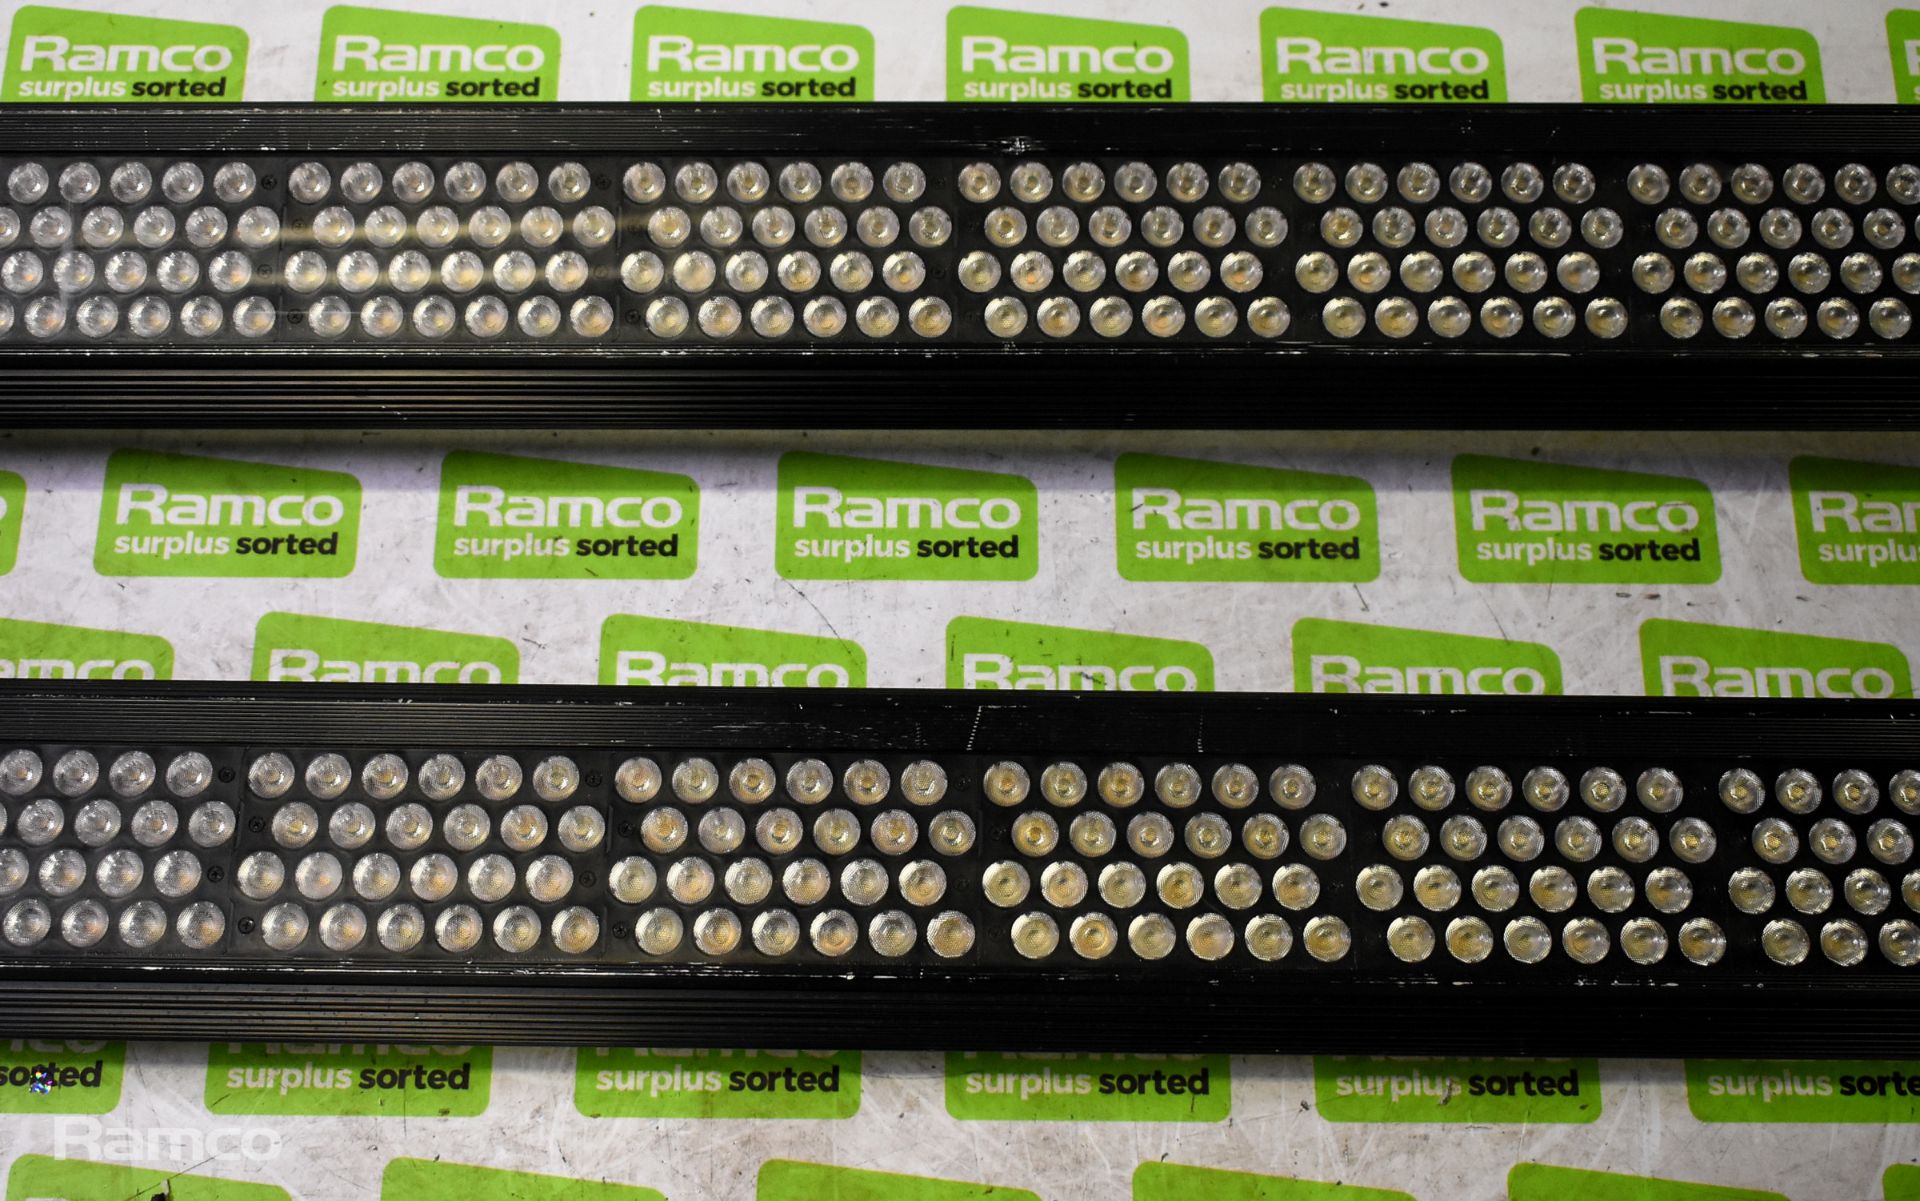 2x Chroma-Q Color Force 72 LED fixture lights with flight case - 1x FAULTY LIGHT - Image 8 of 11